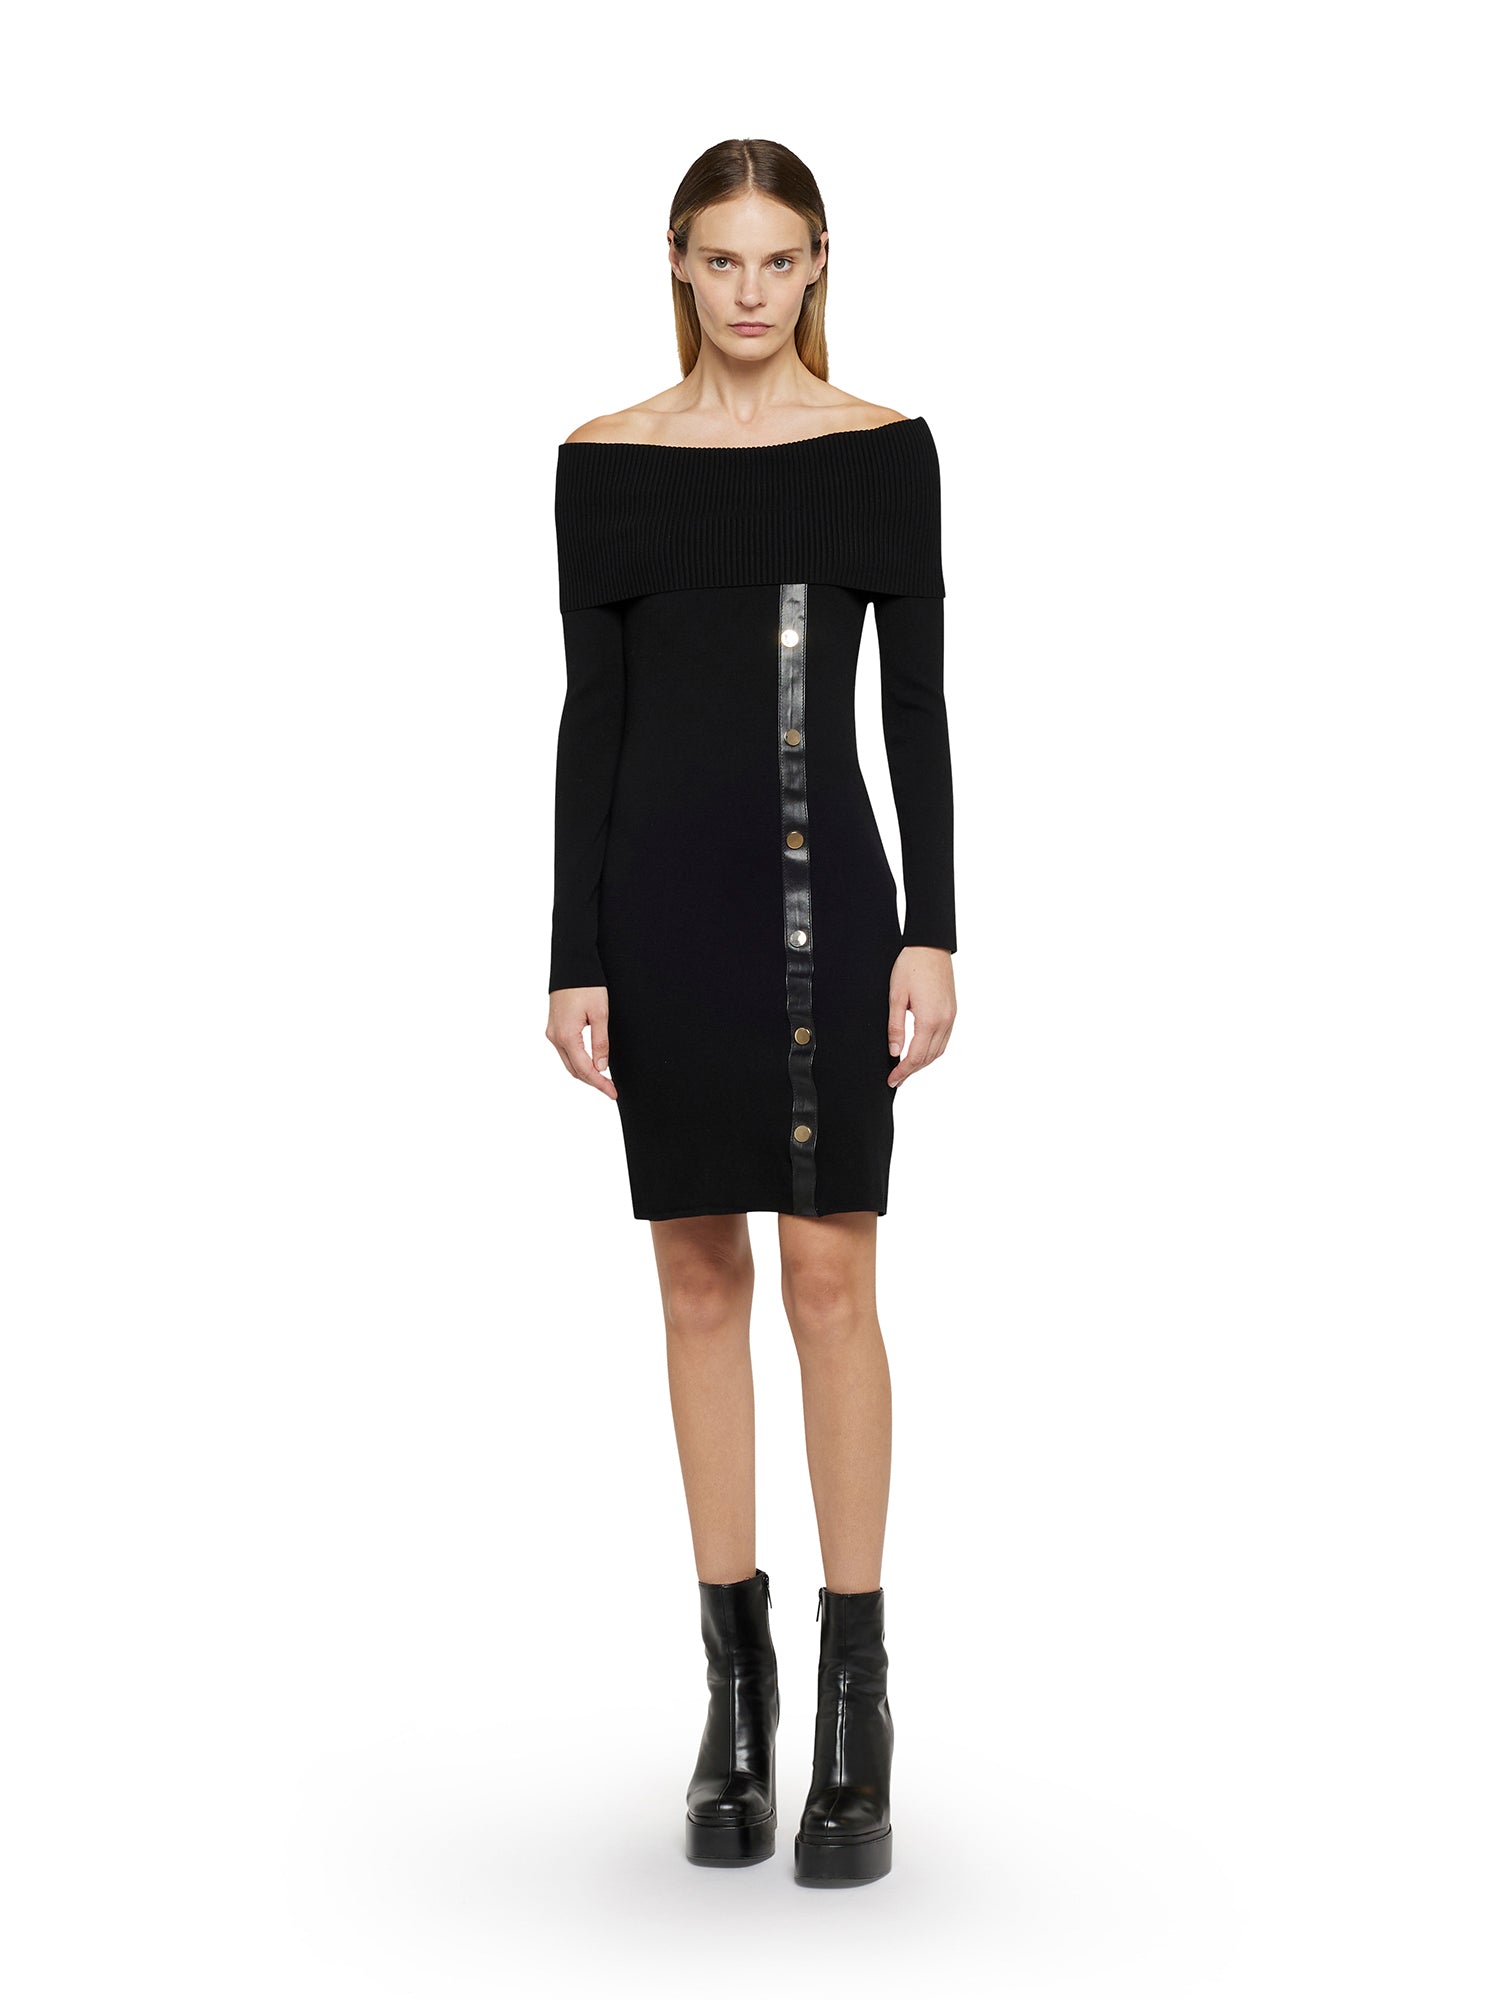 Schiffer dress in techno viscose and faux leather detailing